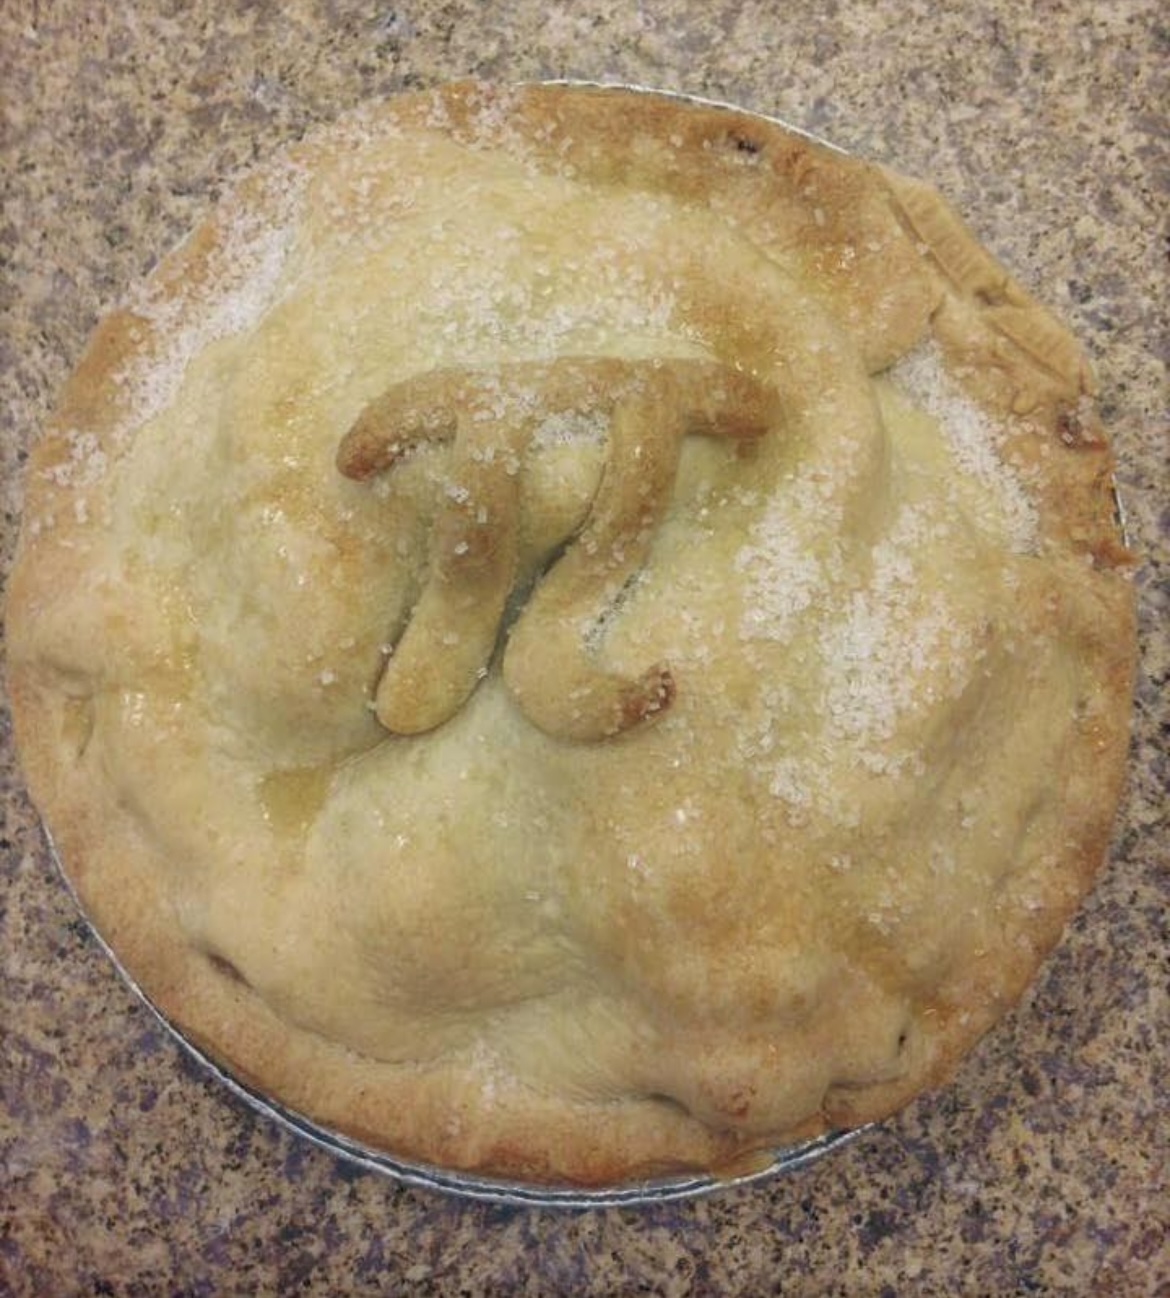 A photo of the top of a pie from the Pie Place with sugar sprinkled on top. There is a Pi symbol baked into the pie.